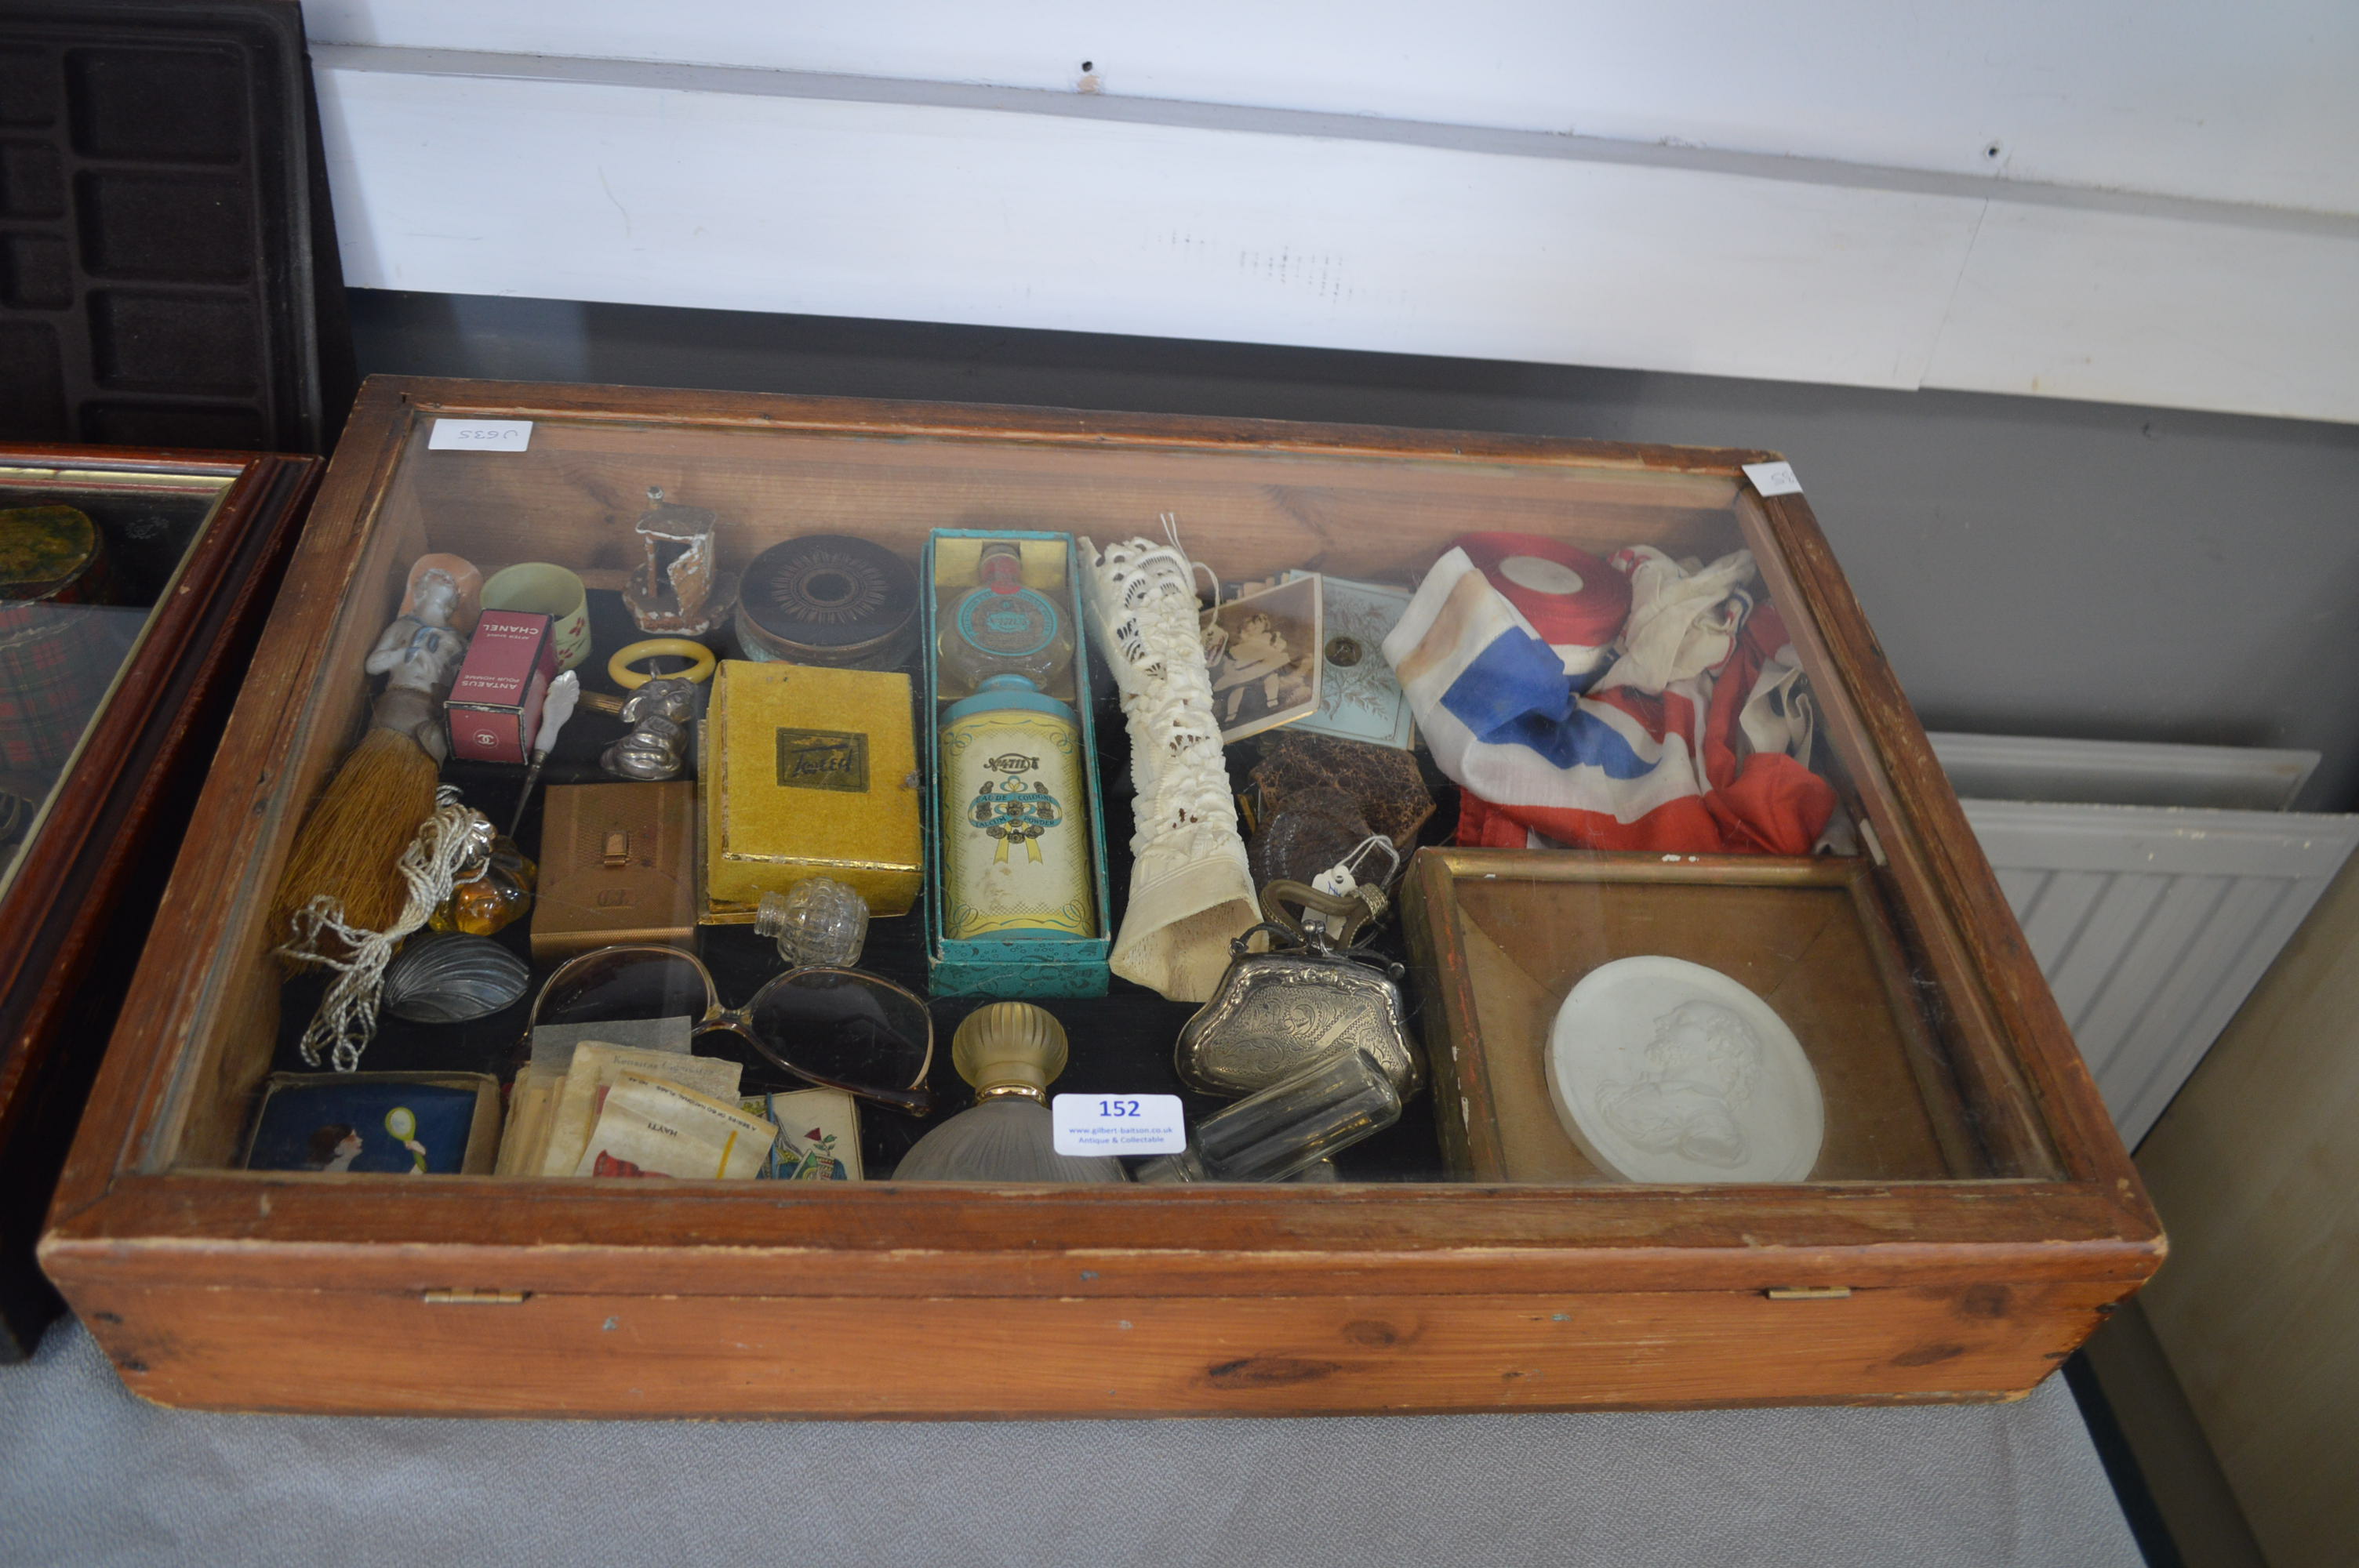 Pine Tabletop Display Case and Contents Including Vintage Items, Scent Bottles, etc. - Image 2 of 2